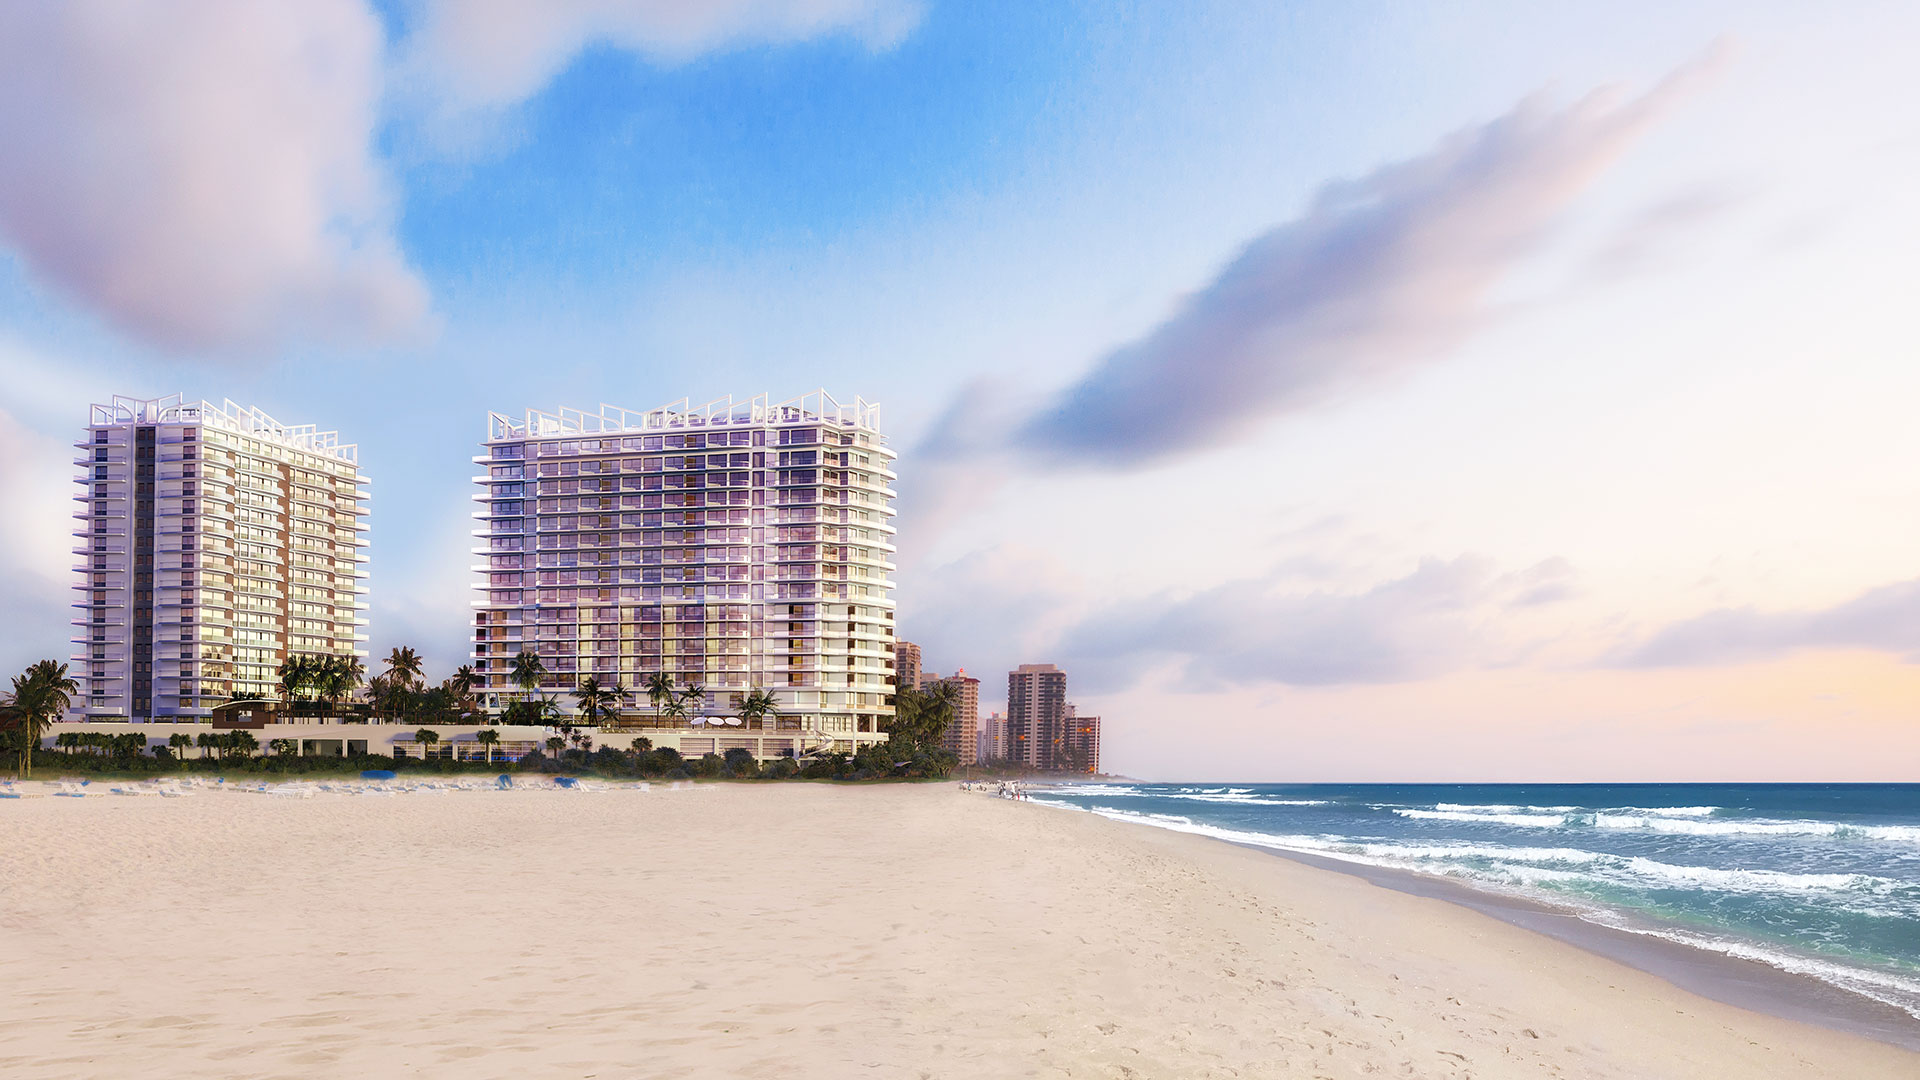 Amrit Ocean Resort &#038; Residences Will Introduce a New Way of Mindful Living in Palm Beach